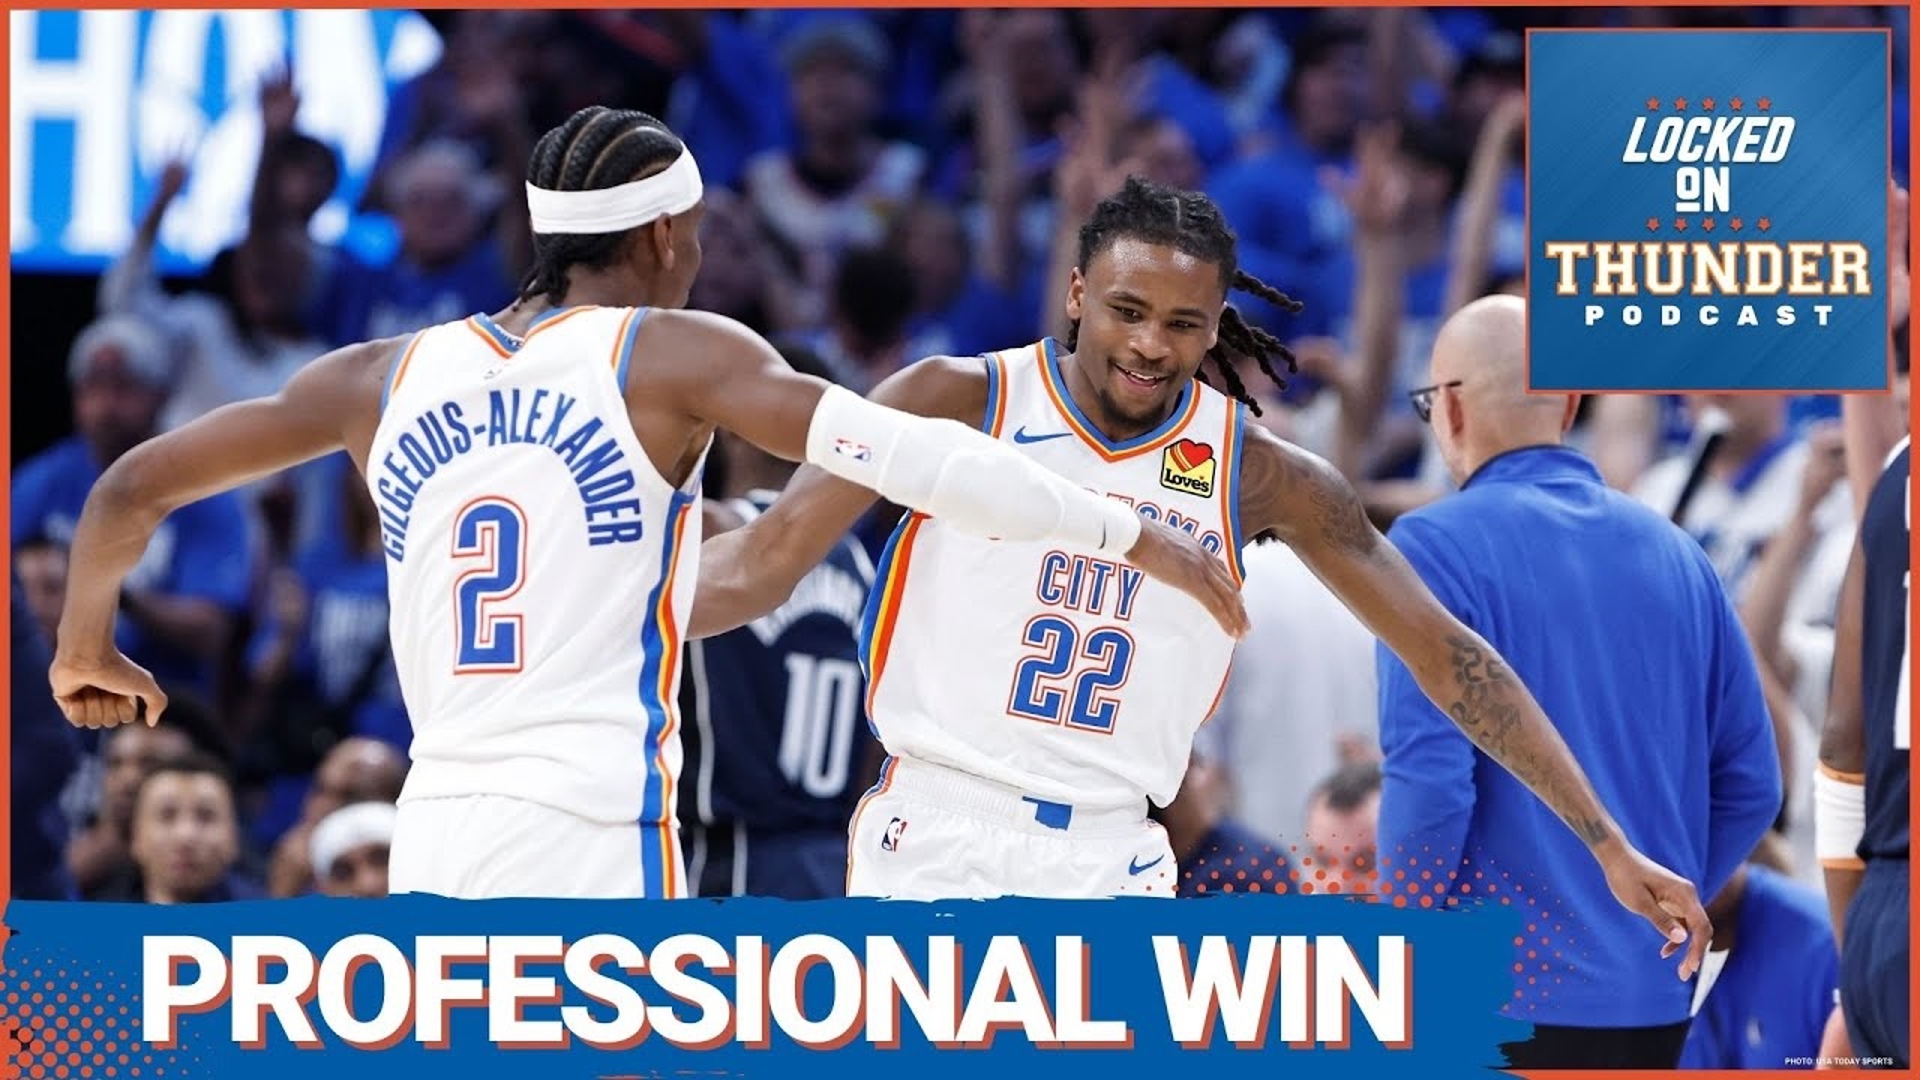 The Oklahoma City Thunder dominated the Dallas Mavericks by the end of Game 1. Though, this was a professional win for the OKC Thunder.